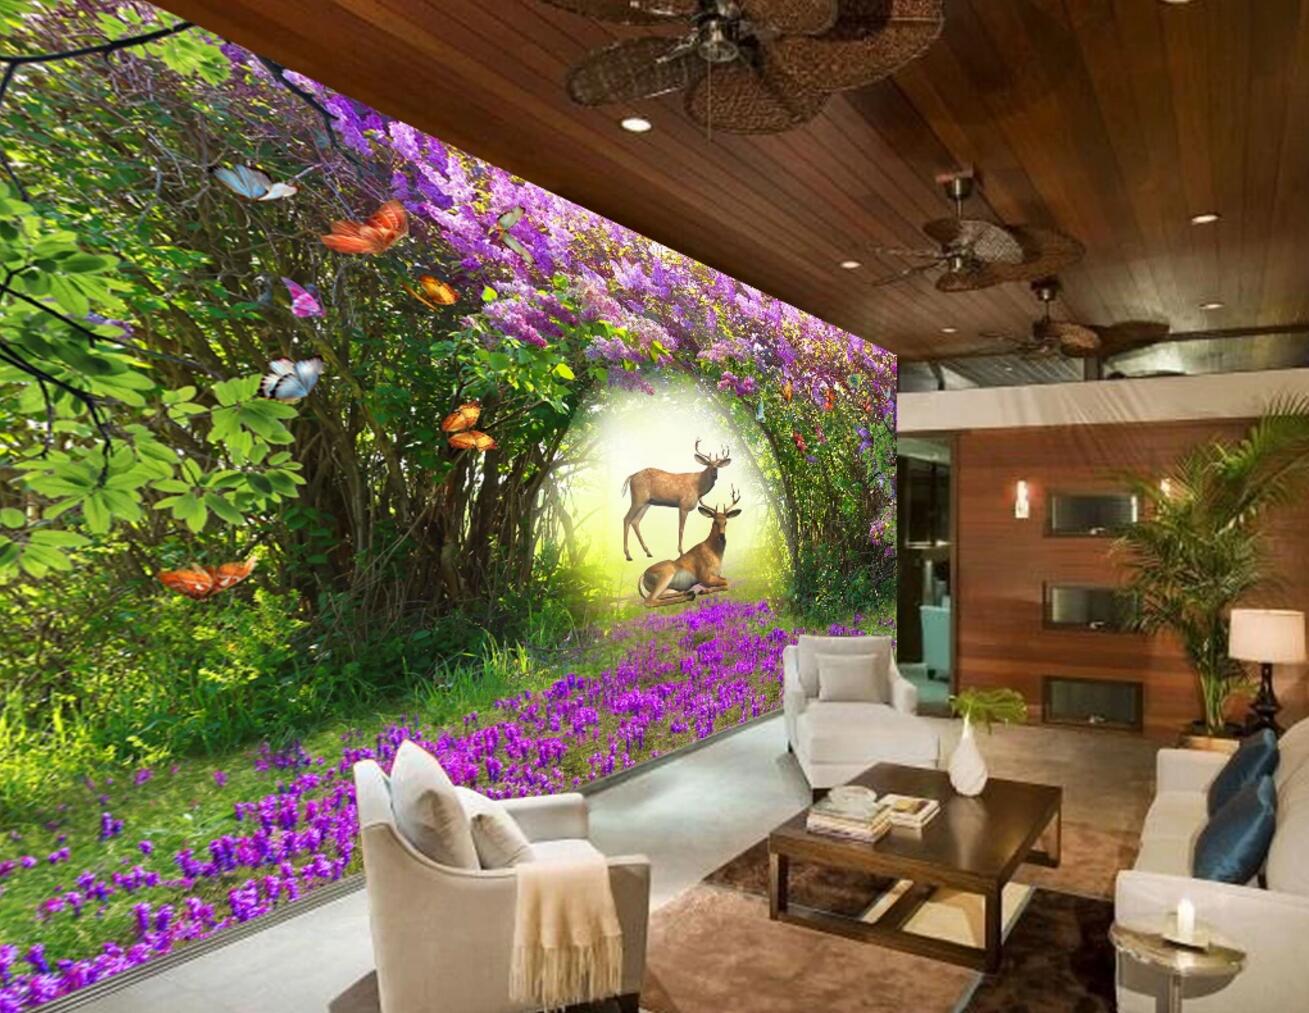 3D Sika Deer Forest WC220 Wall Murals